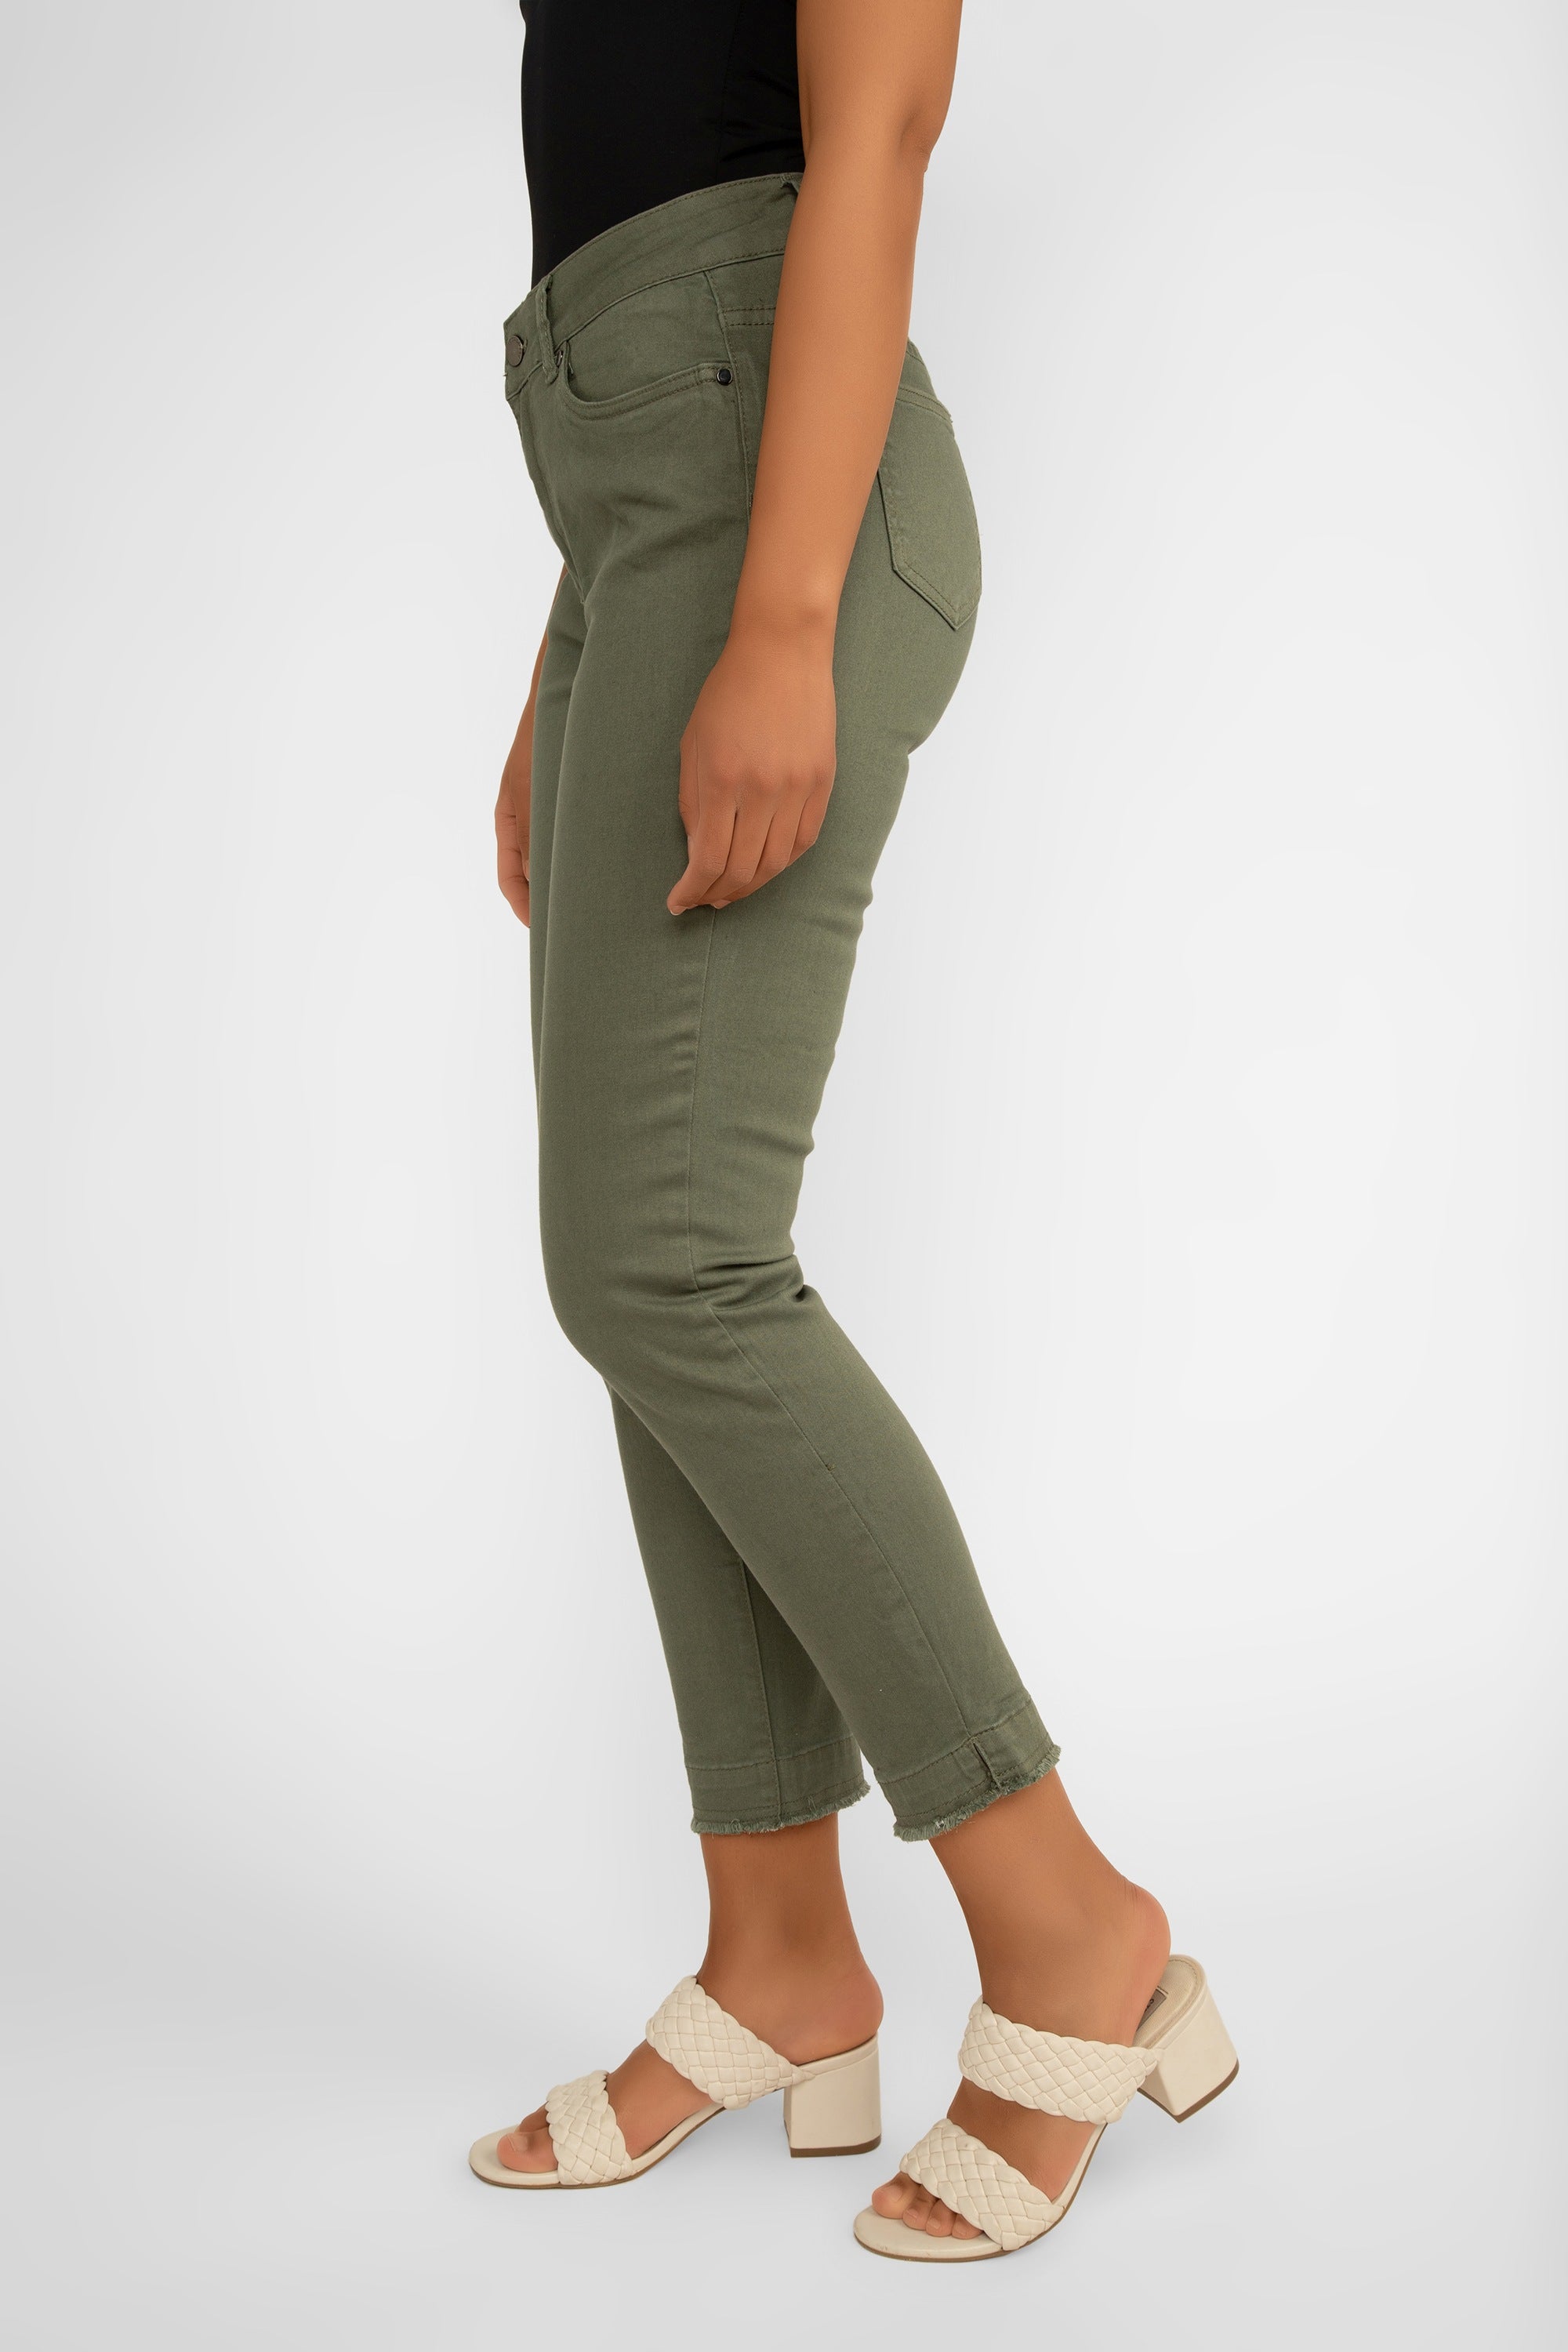 Picadilly (J6051) Women's Slim Fit, Cropped Jeans with Frayed Hem in Khaki Green